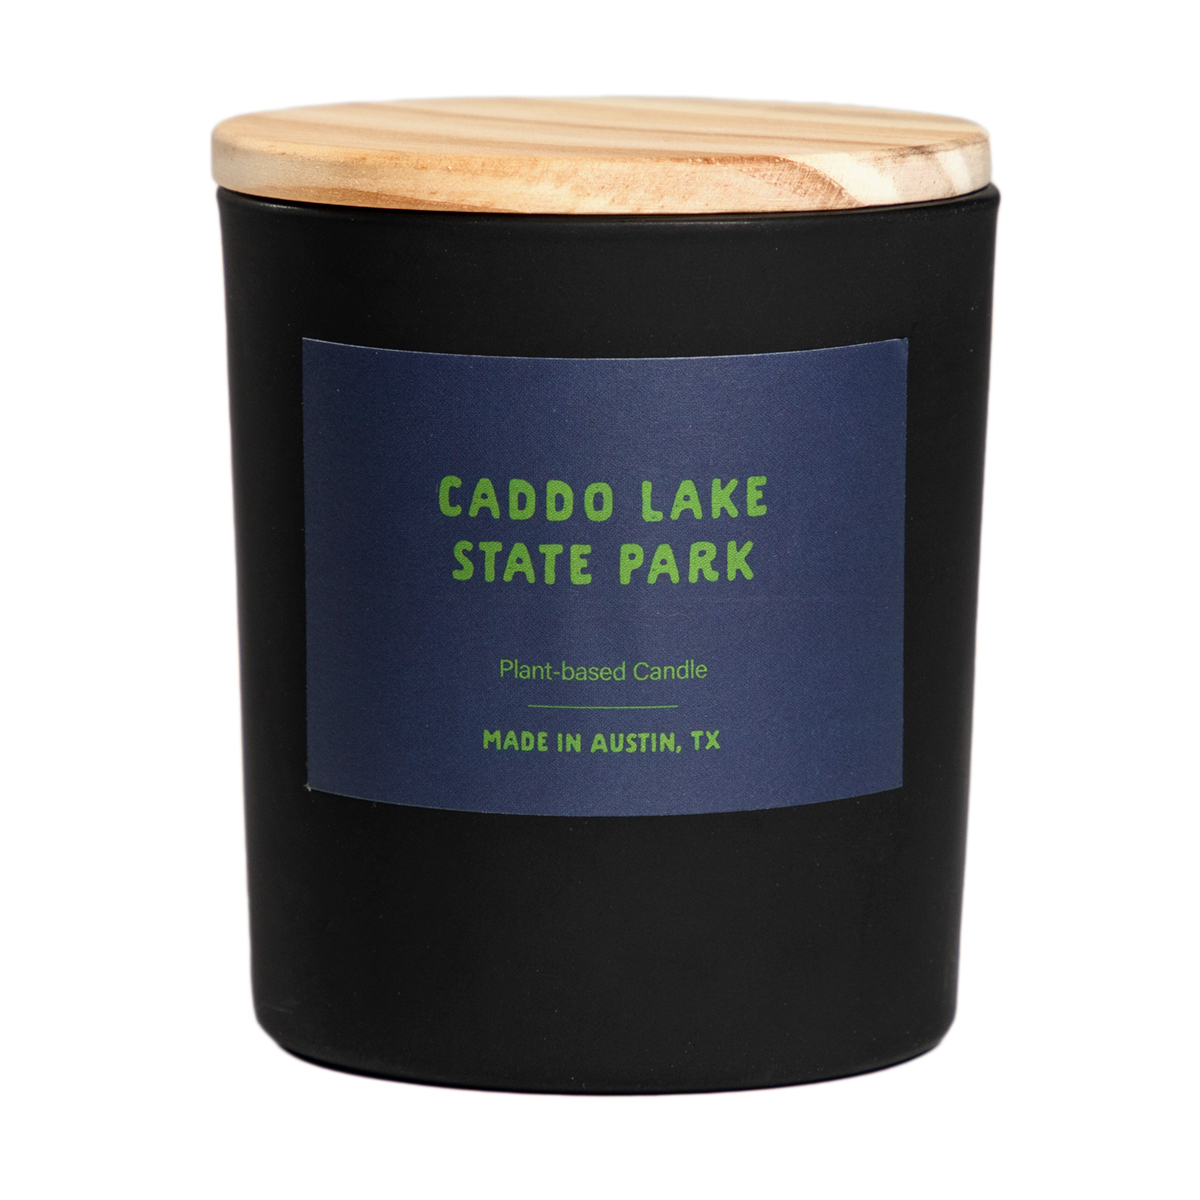 Caddo Lake State Park Candle, 11 oz.